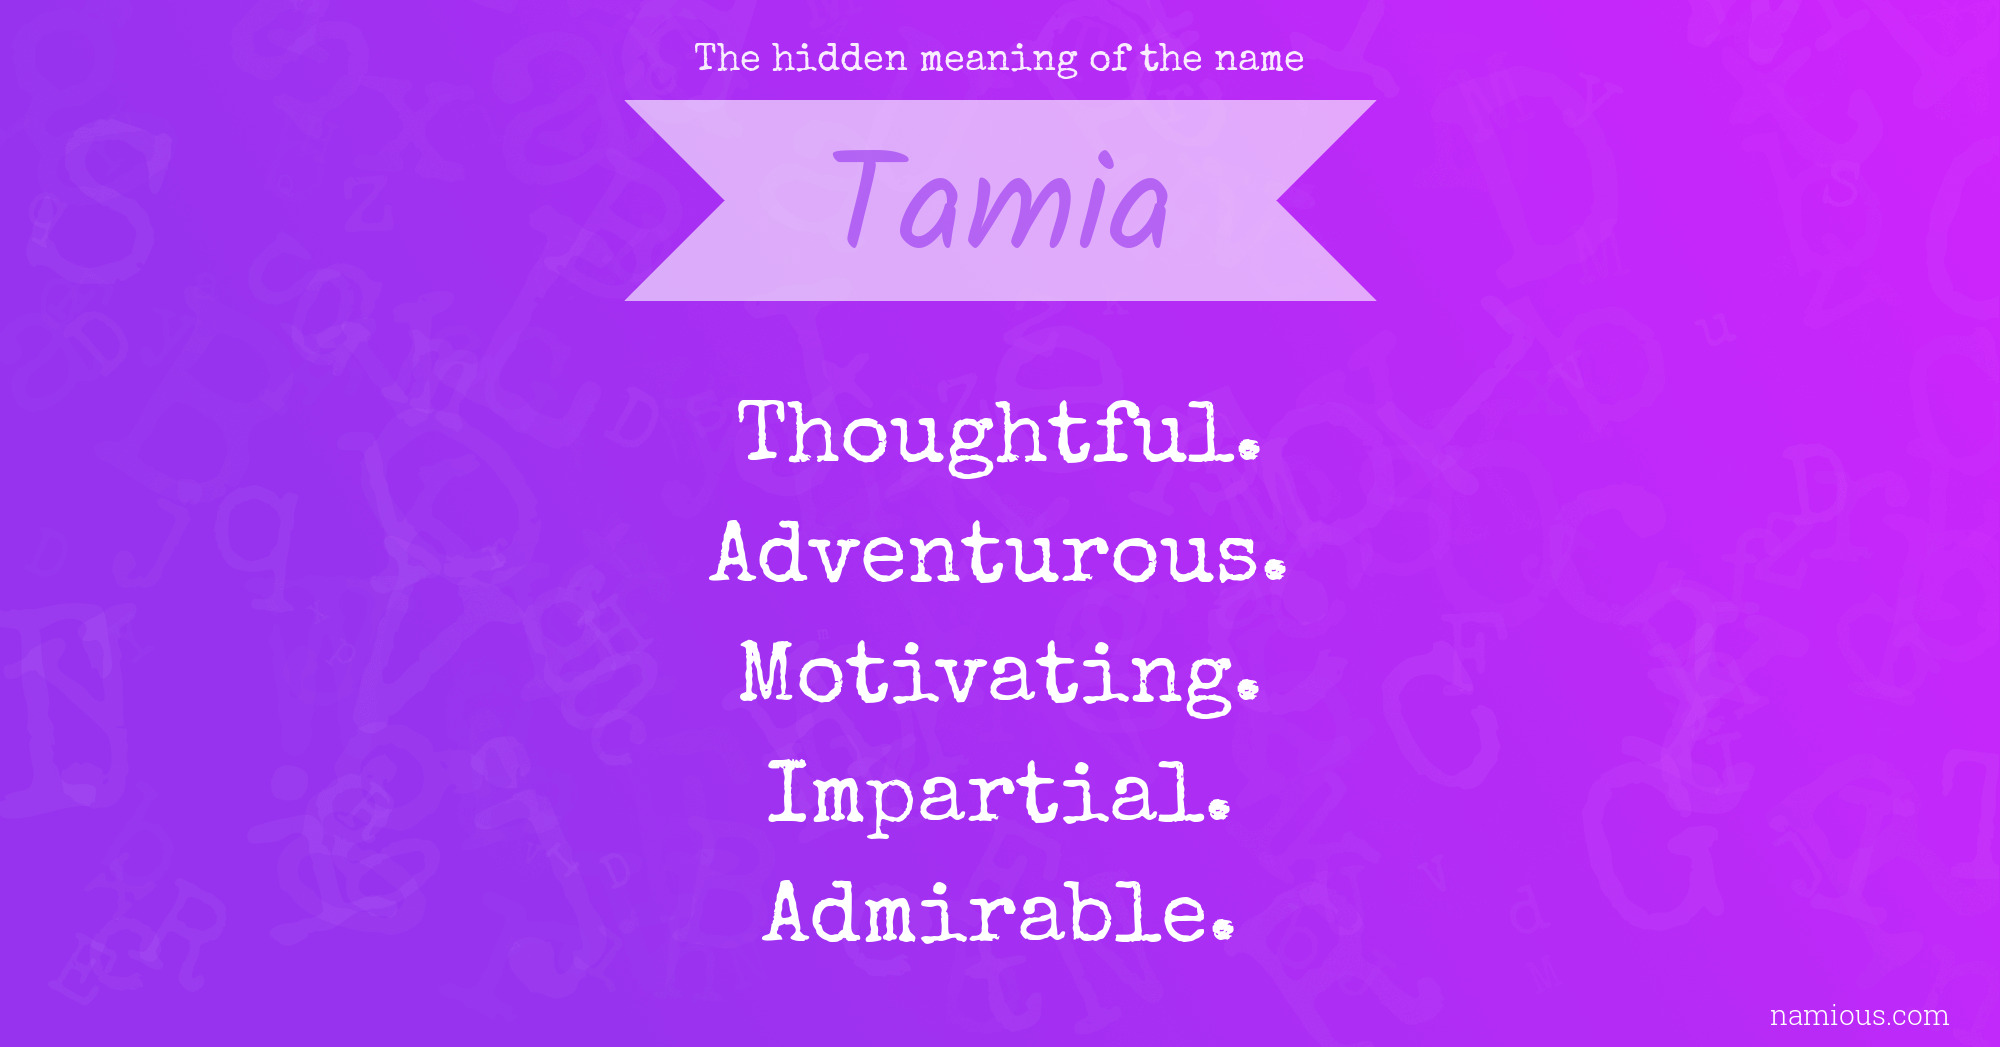 The hidden meaning of the name Tamia